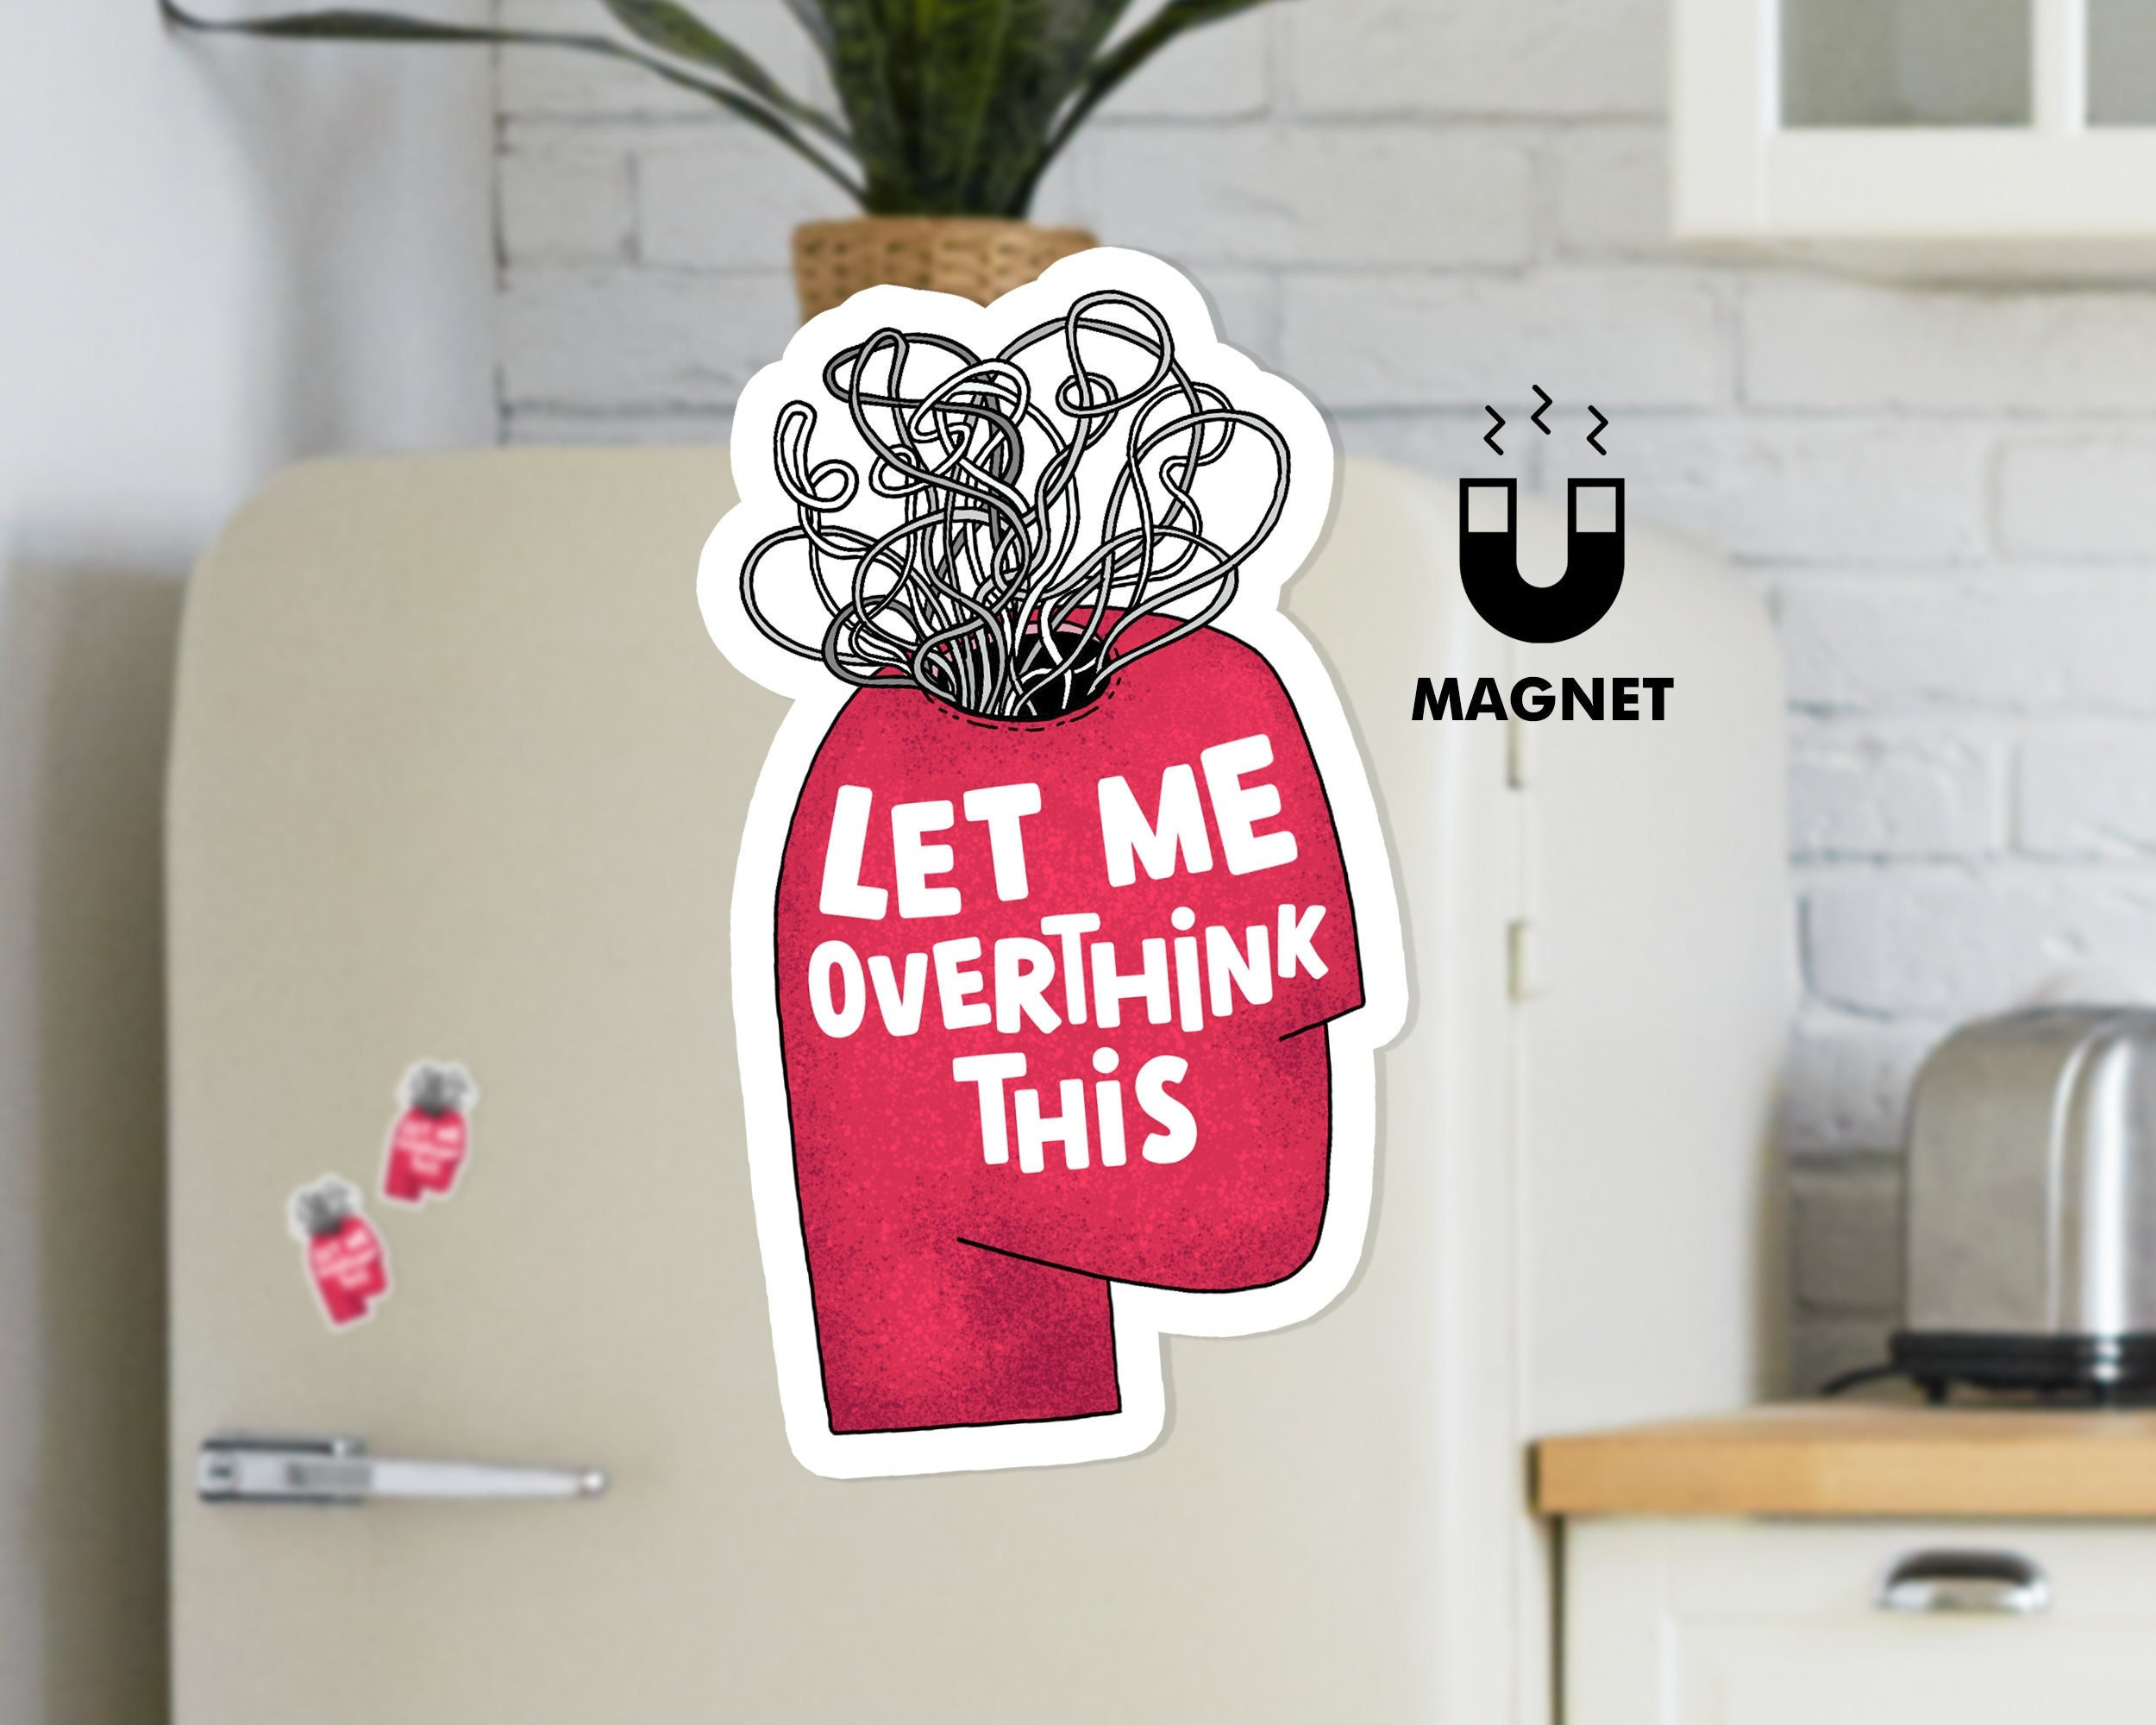 Let Me Overthink This Magnet Funny Vinyl Magnet Quotes - Etsy